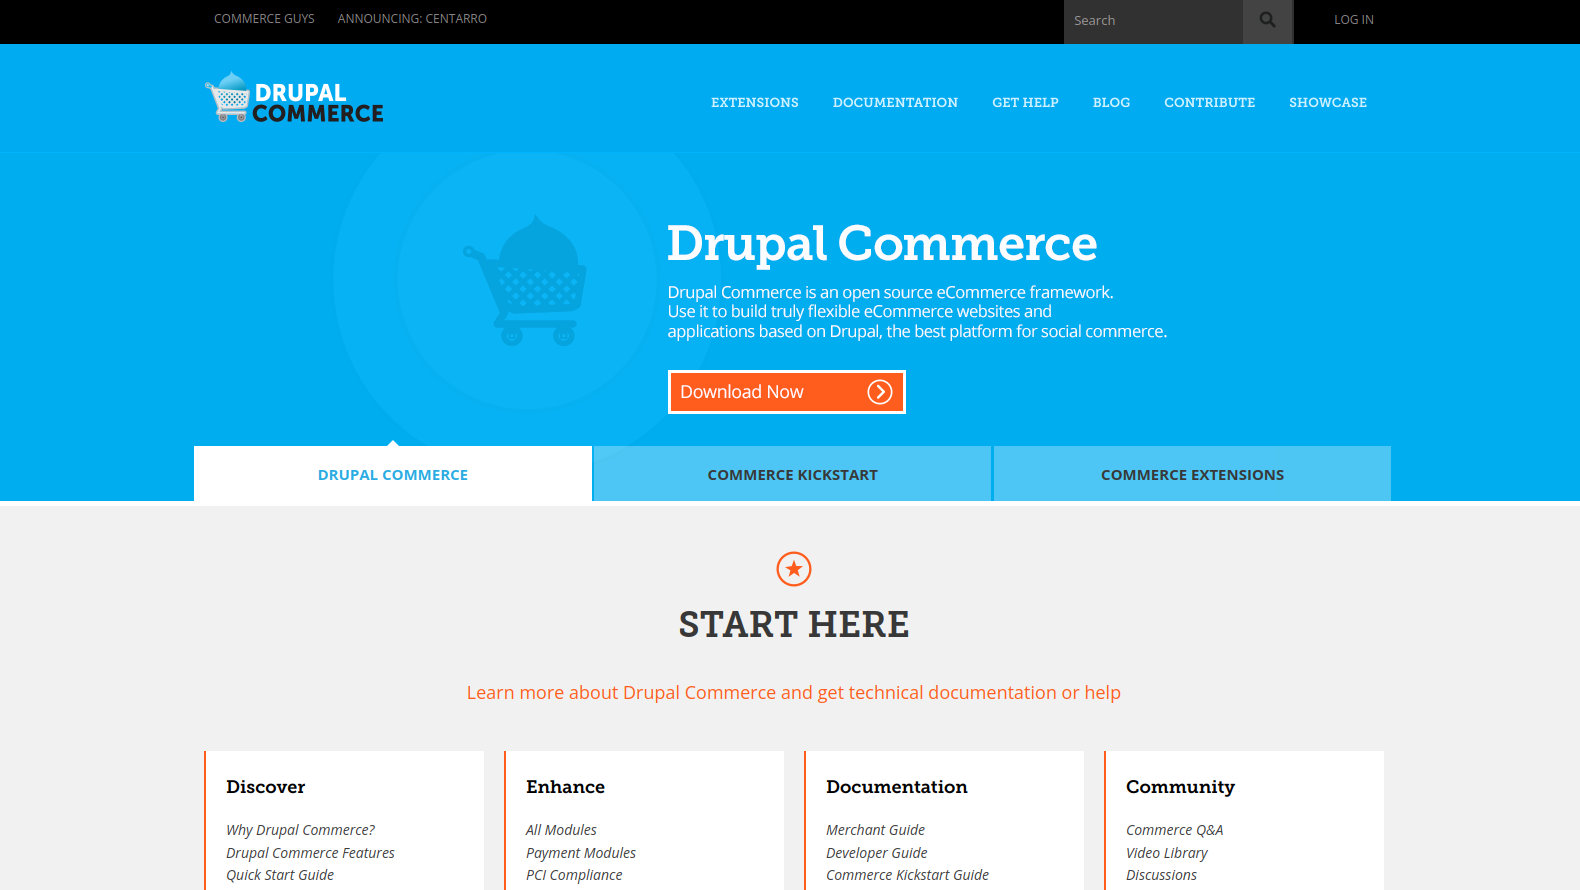 Drupal Commerce: How to add fixed and percentage fees based on the payment method